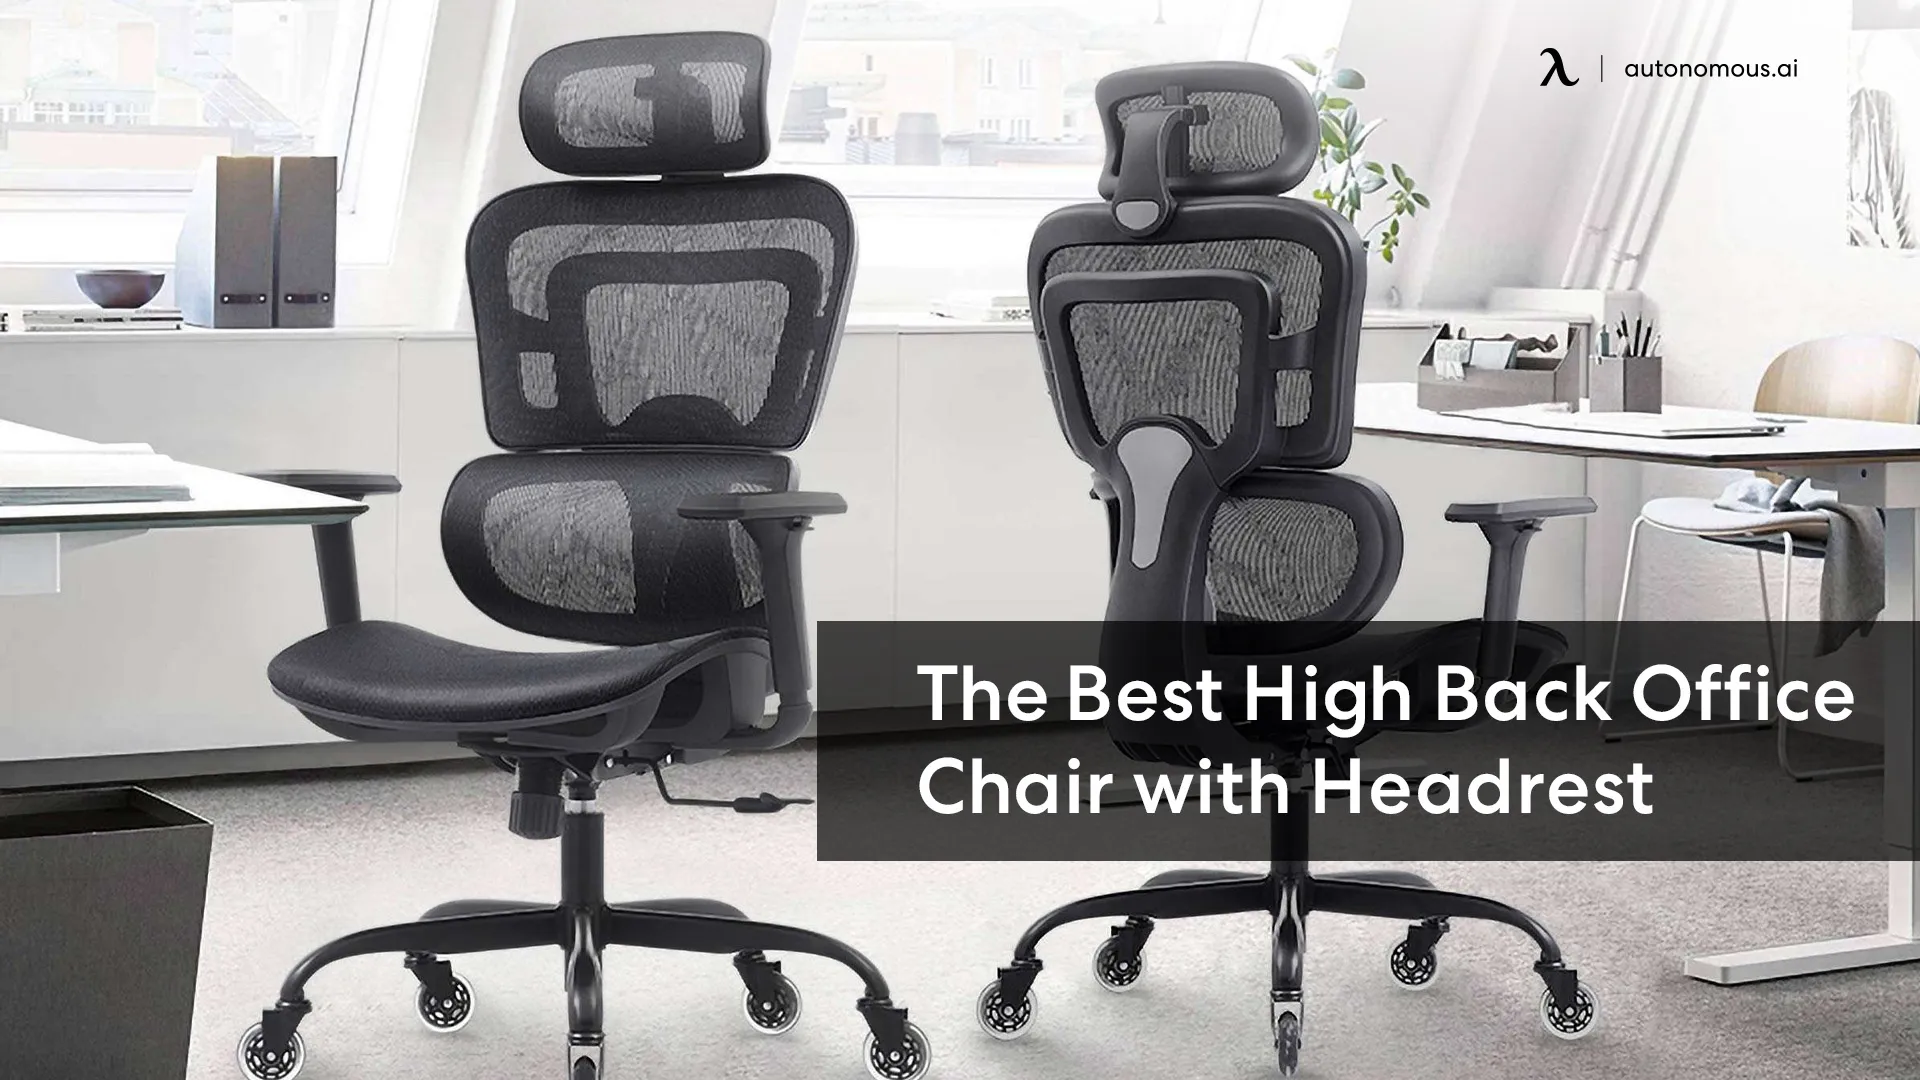 Find The Best High-Back Ergonomic Office Chairs with Headrest